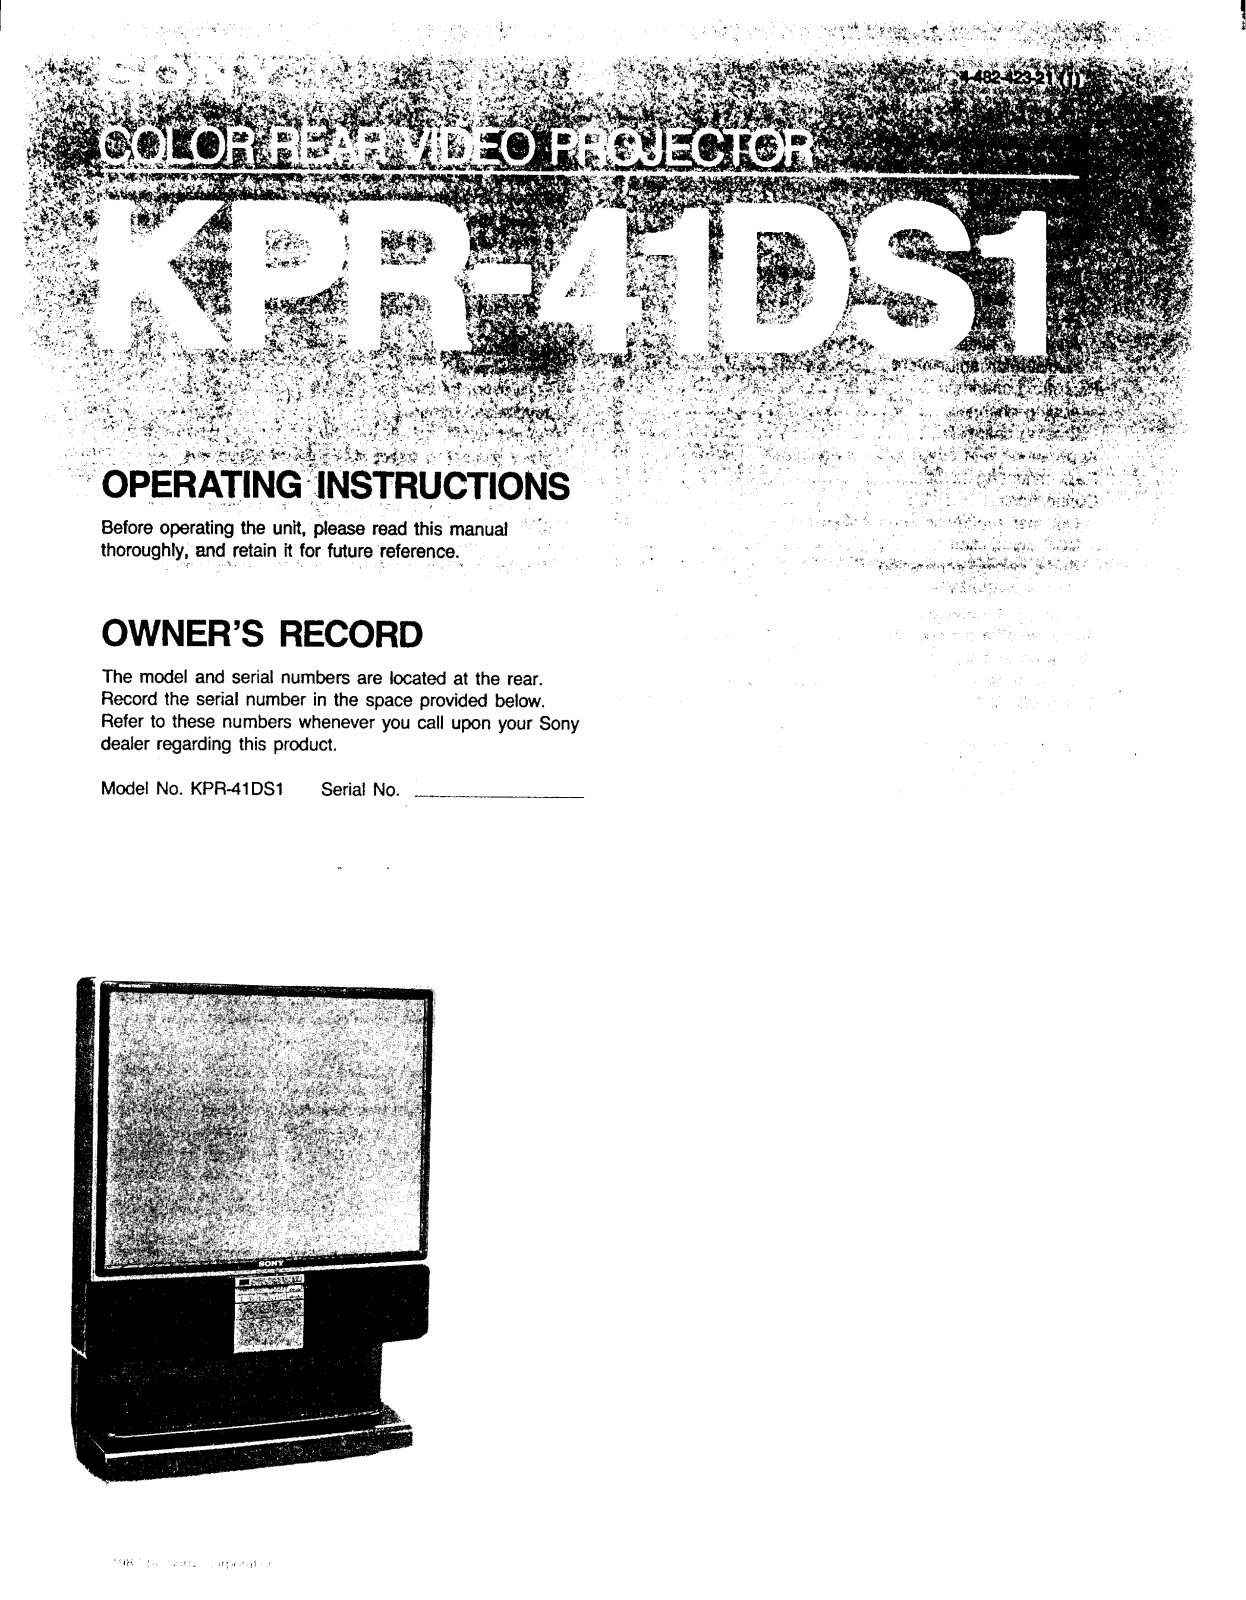 Sony KP-R41DS1 Operating Manual